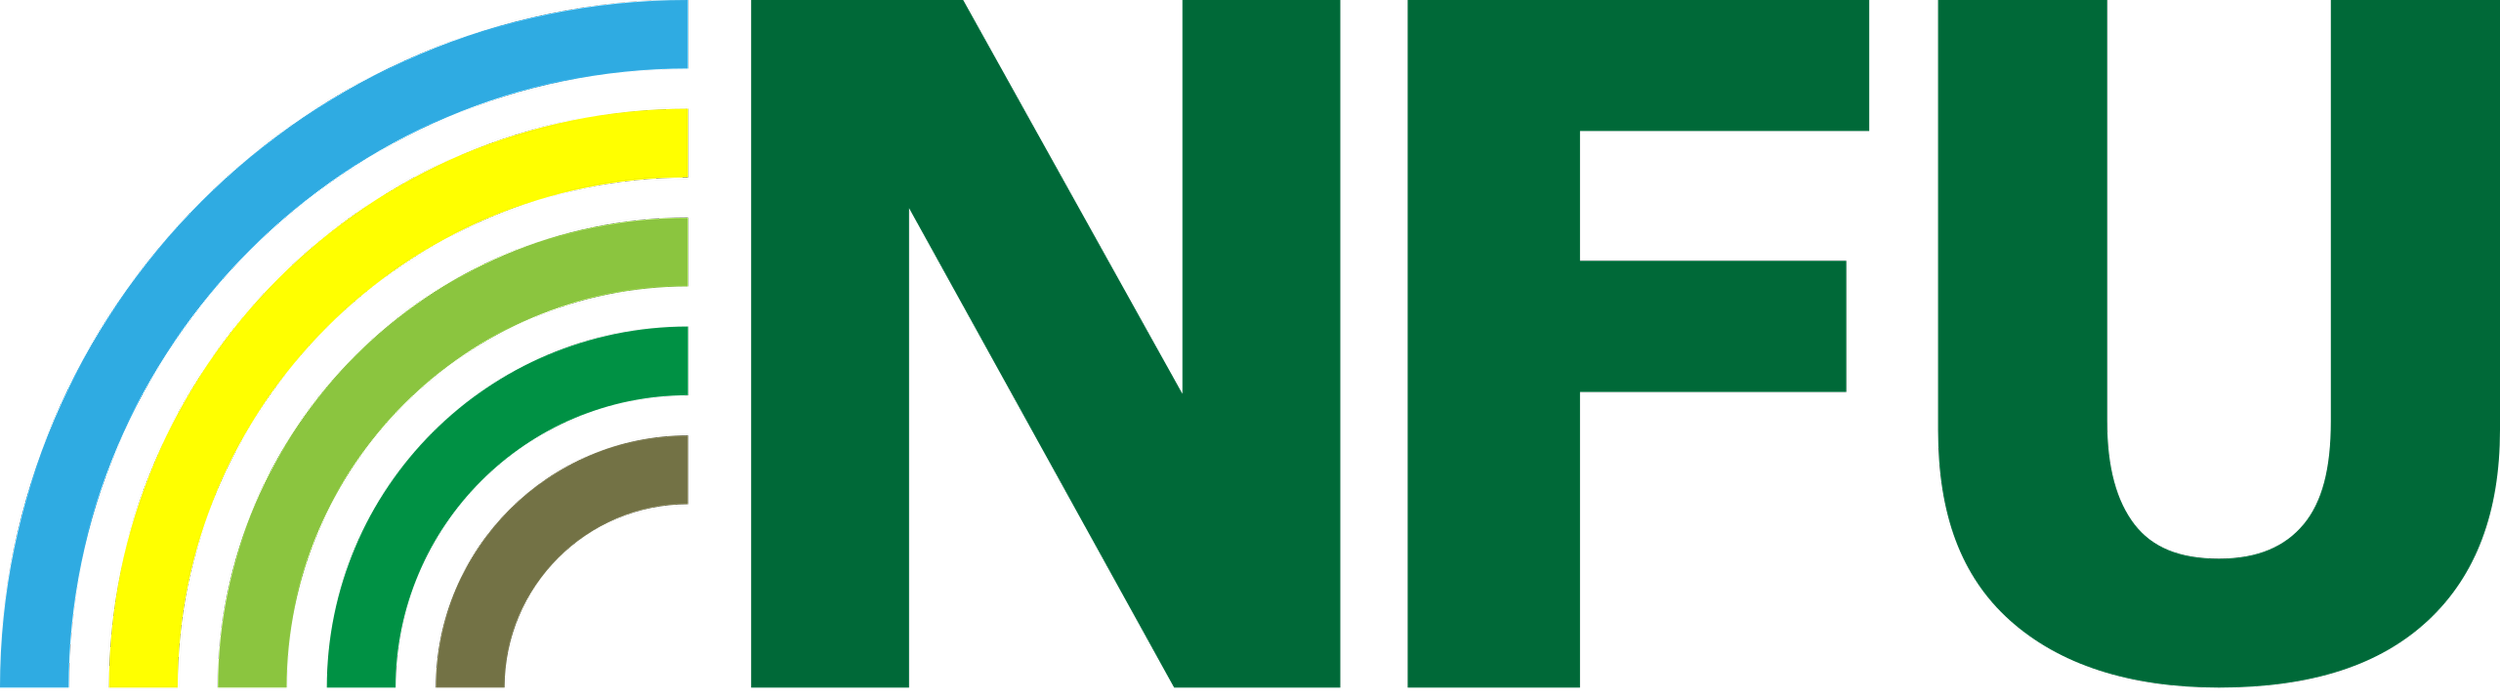 National_Farmers'_Union_of_England_and_Wales_logo.svg.png